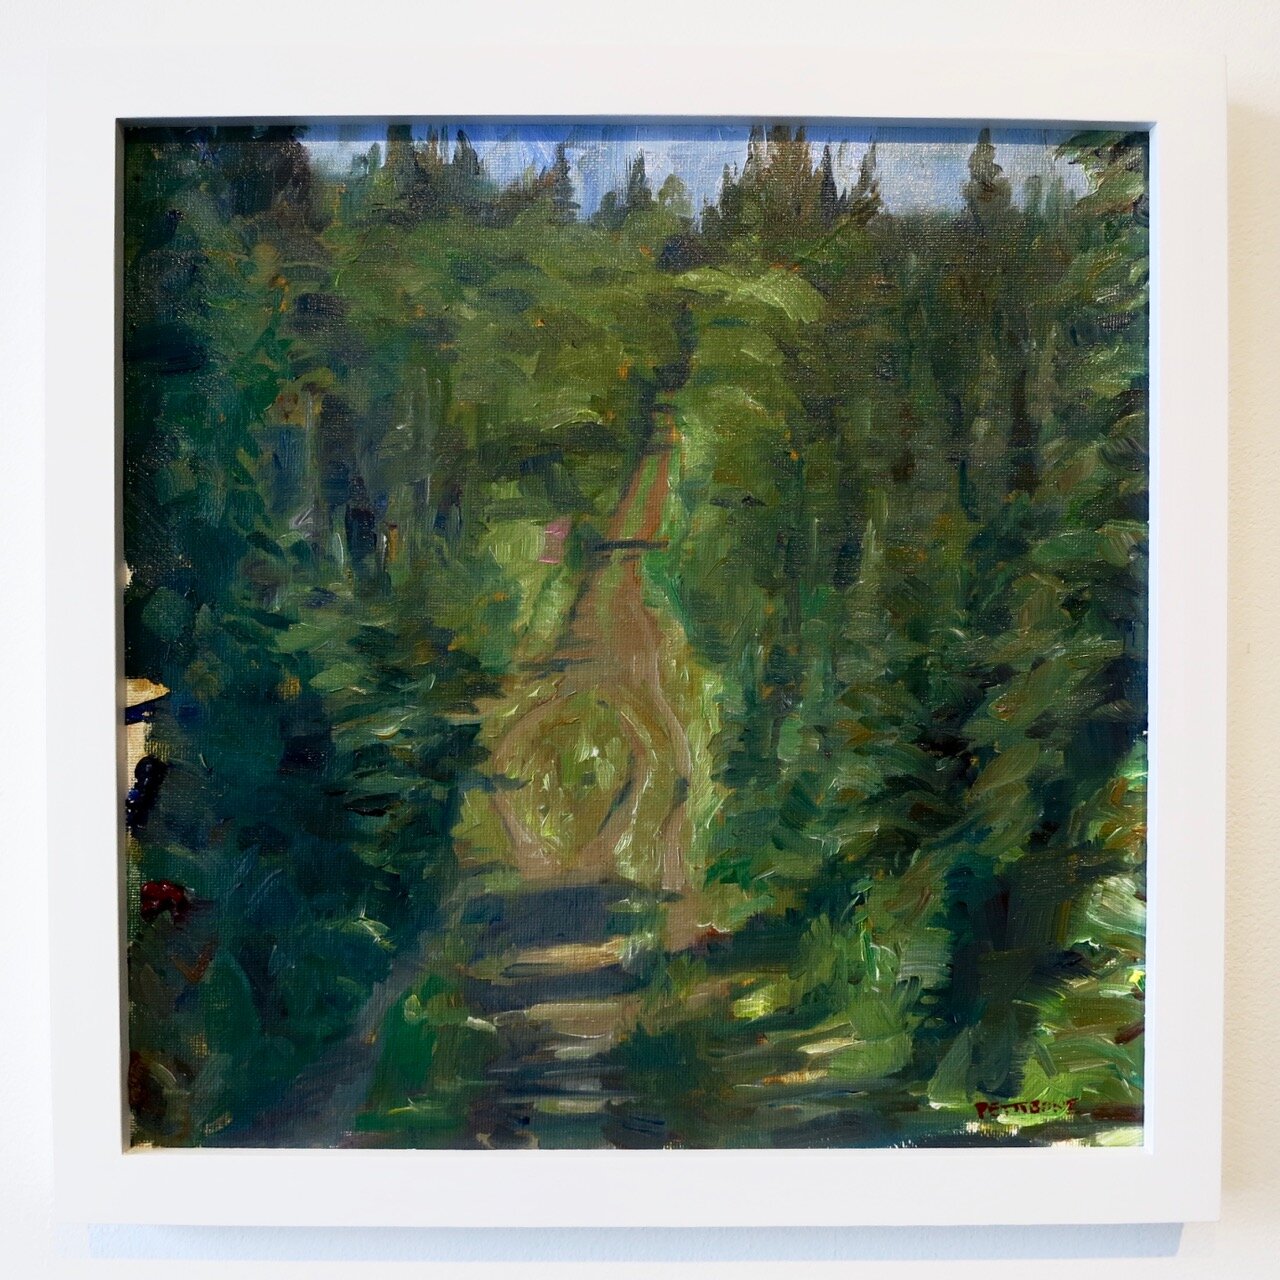    Looking Down the Hill , 2020   Oil on canvas  12x12 inches 